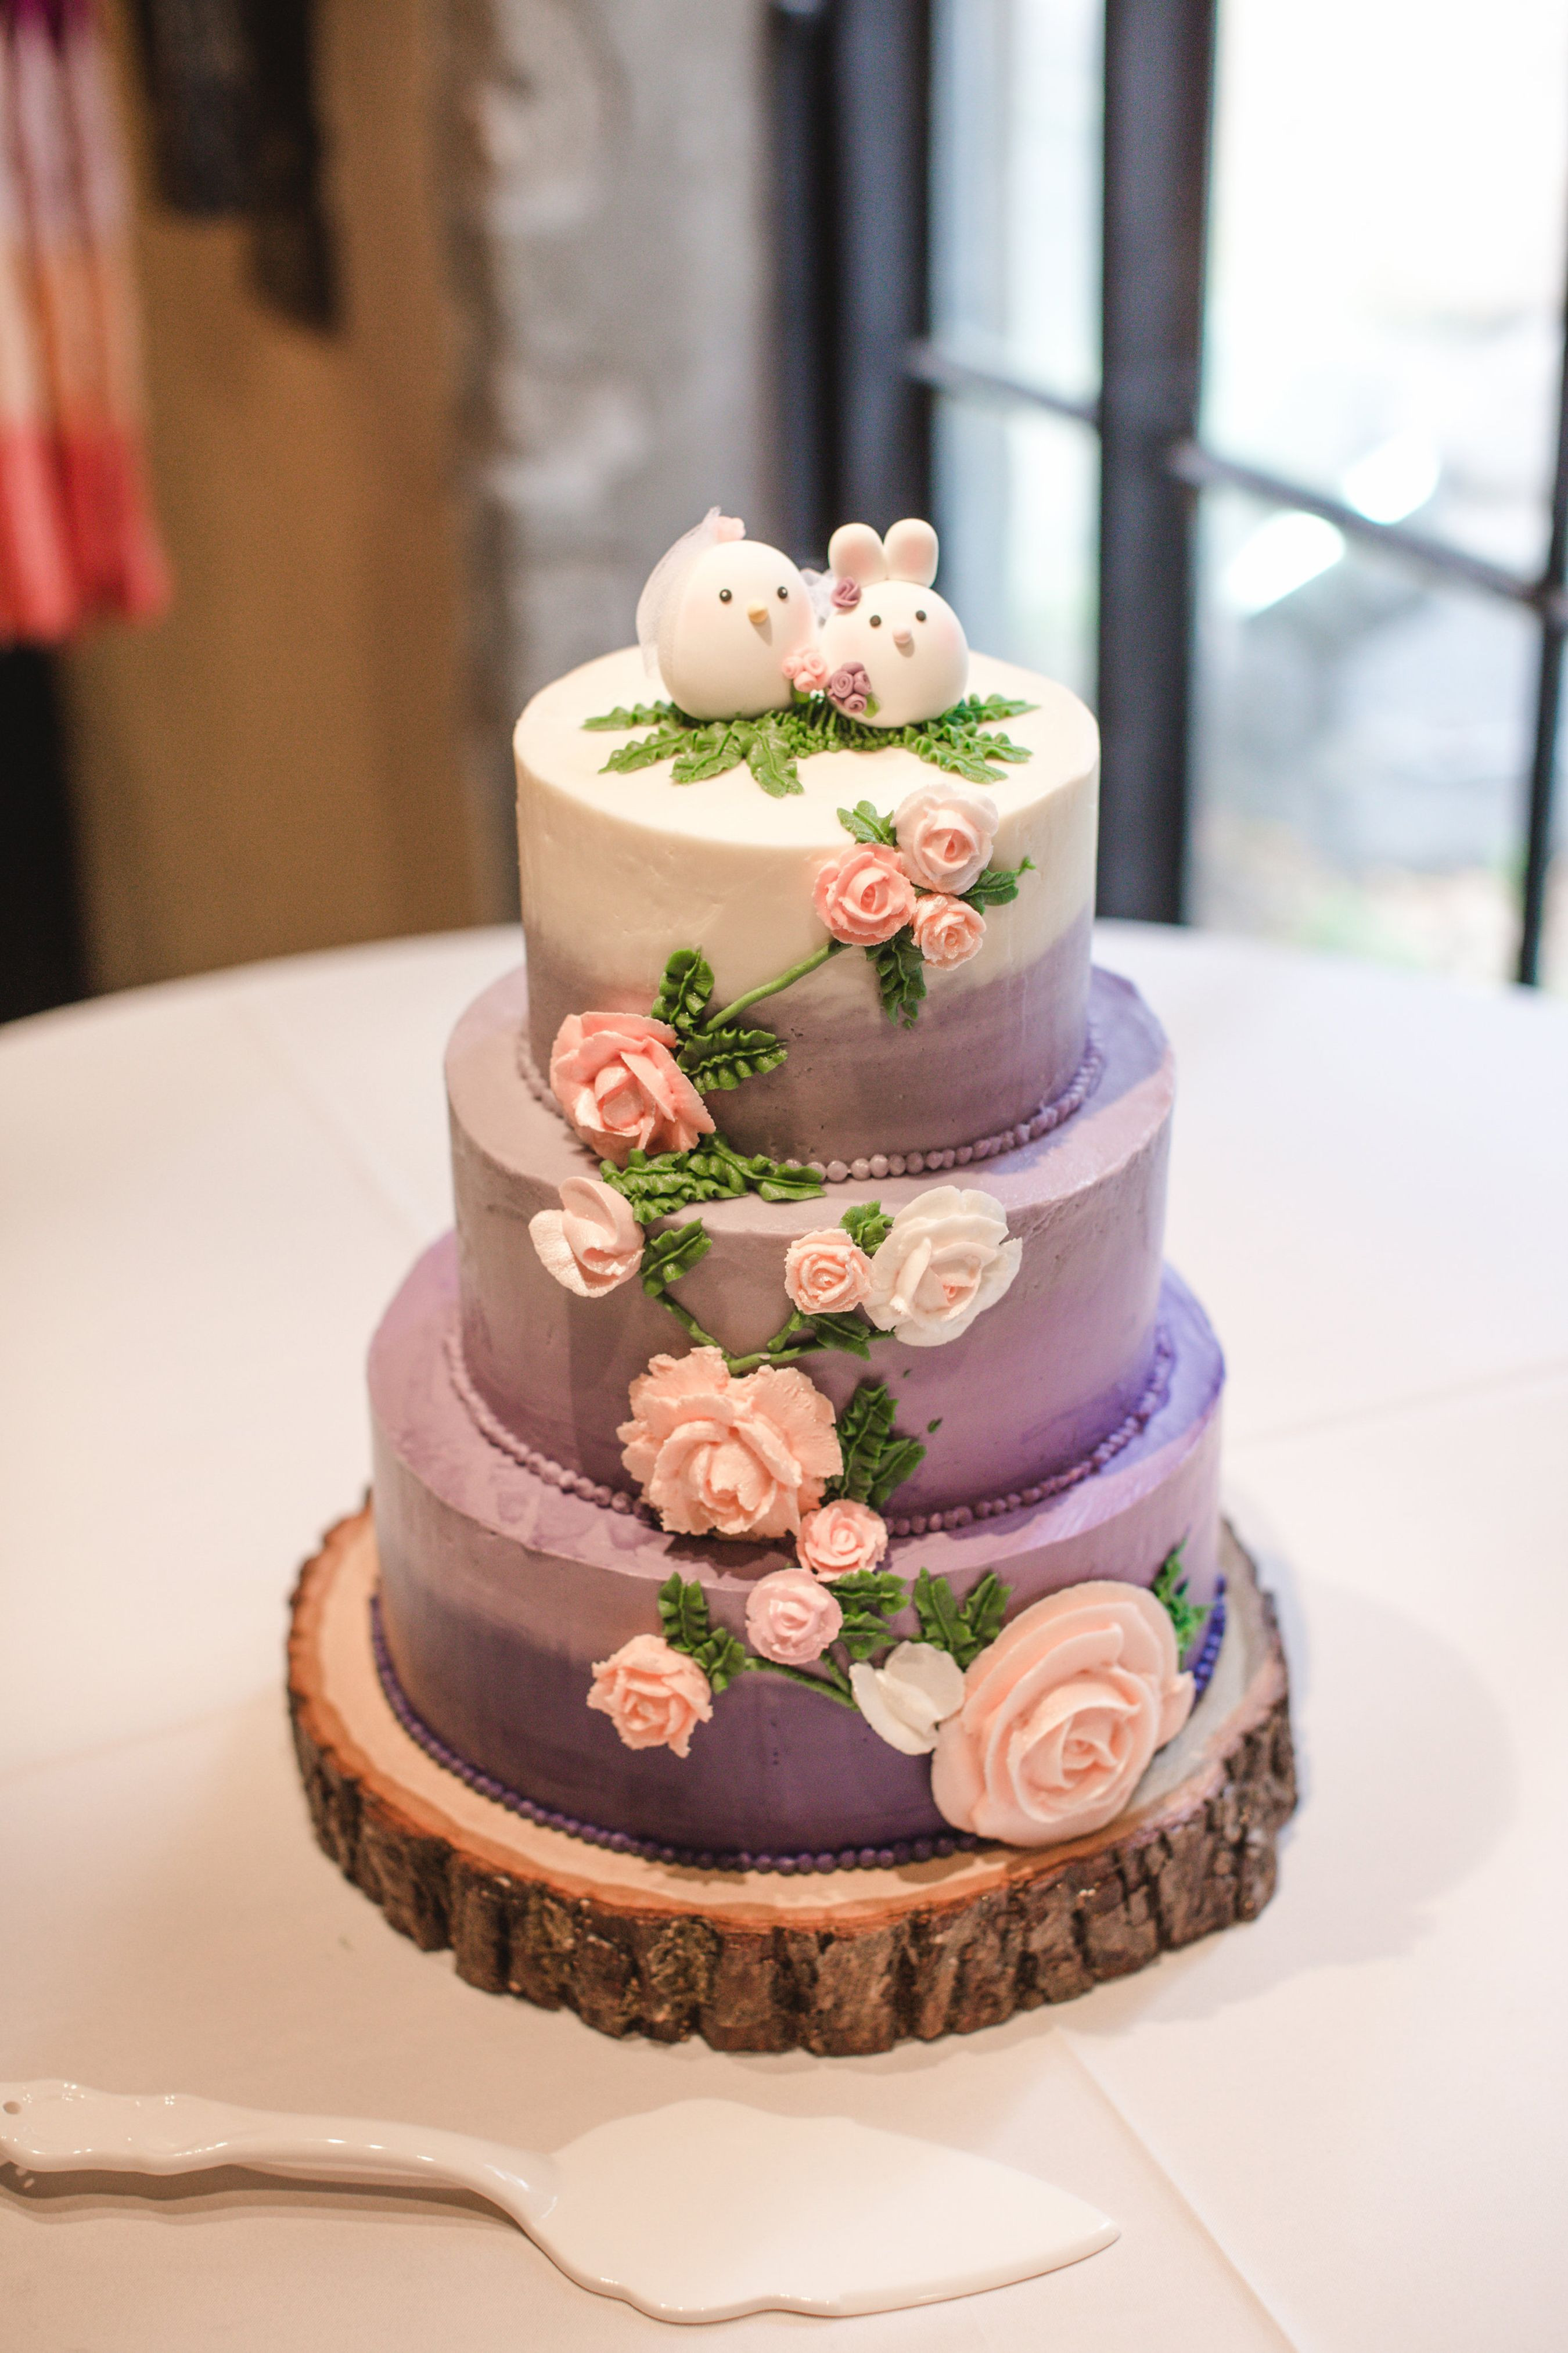 Pictures Of Wedding Cakes
 Three Tier White and Purple Ombre Wedding Cake